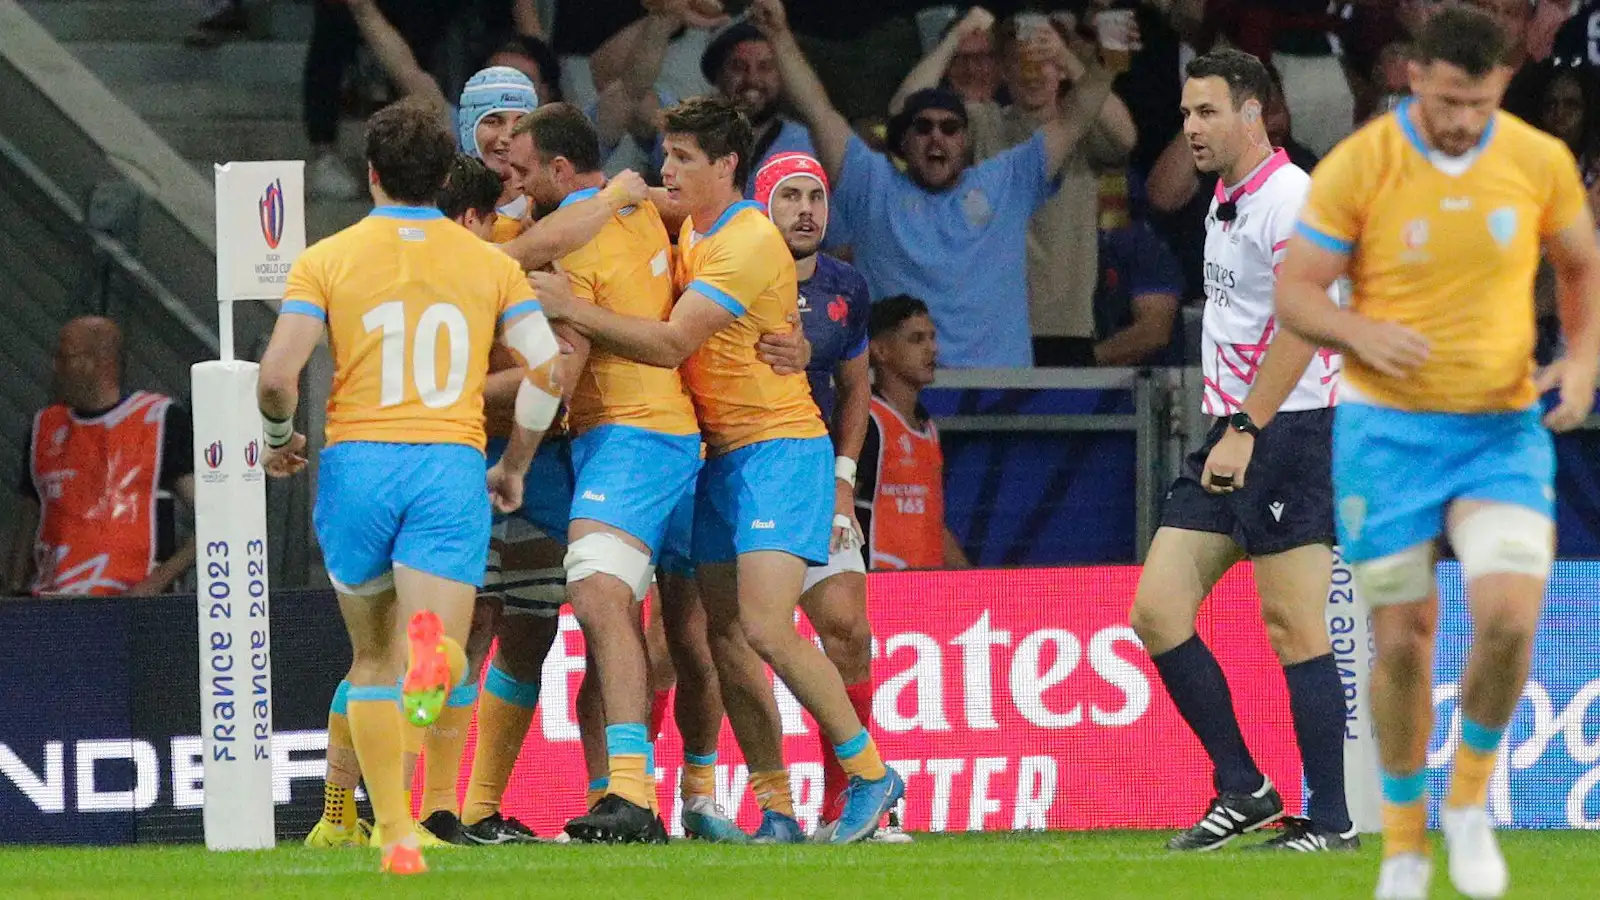 Uruguay celebrate try against France in Rugby World Cup game.